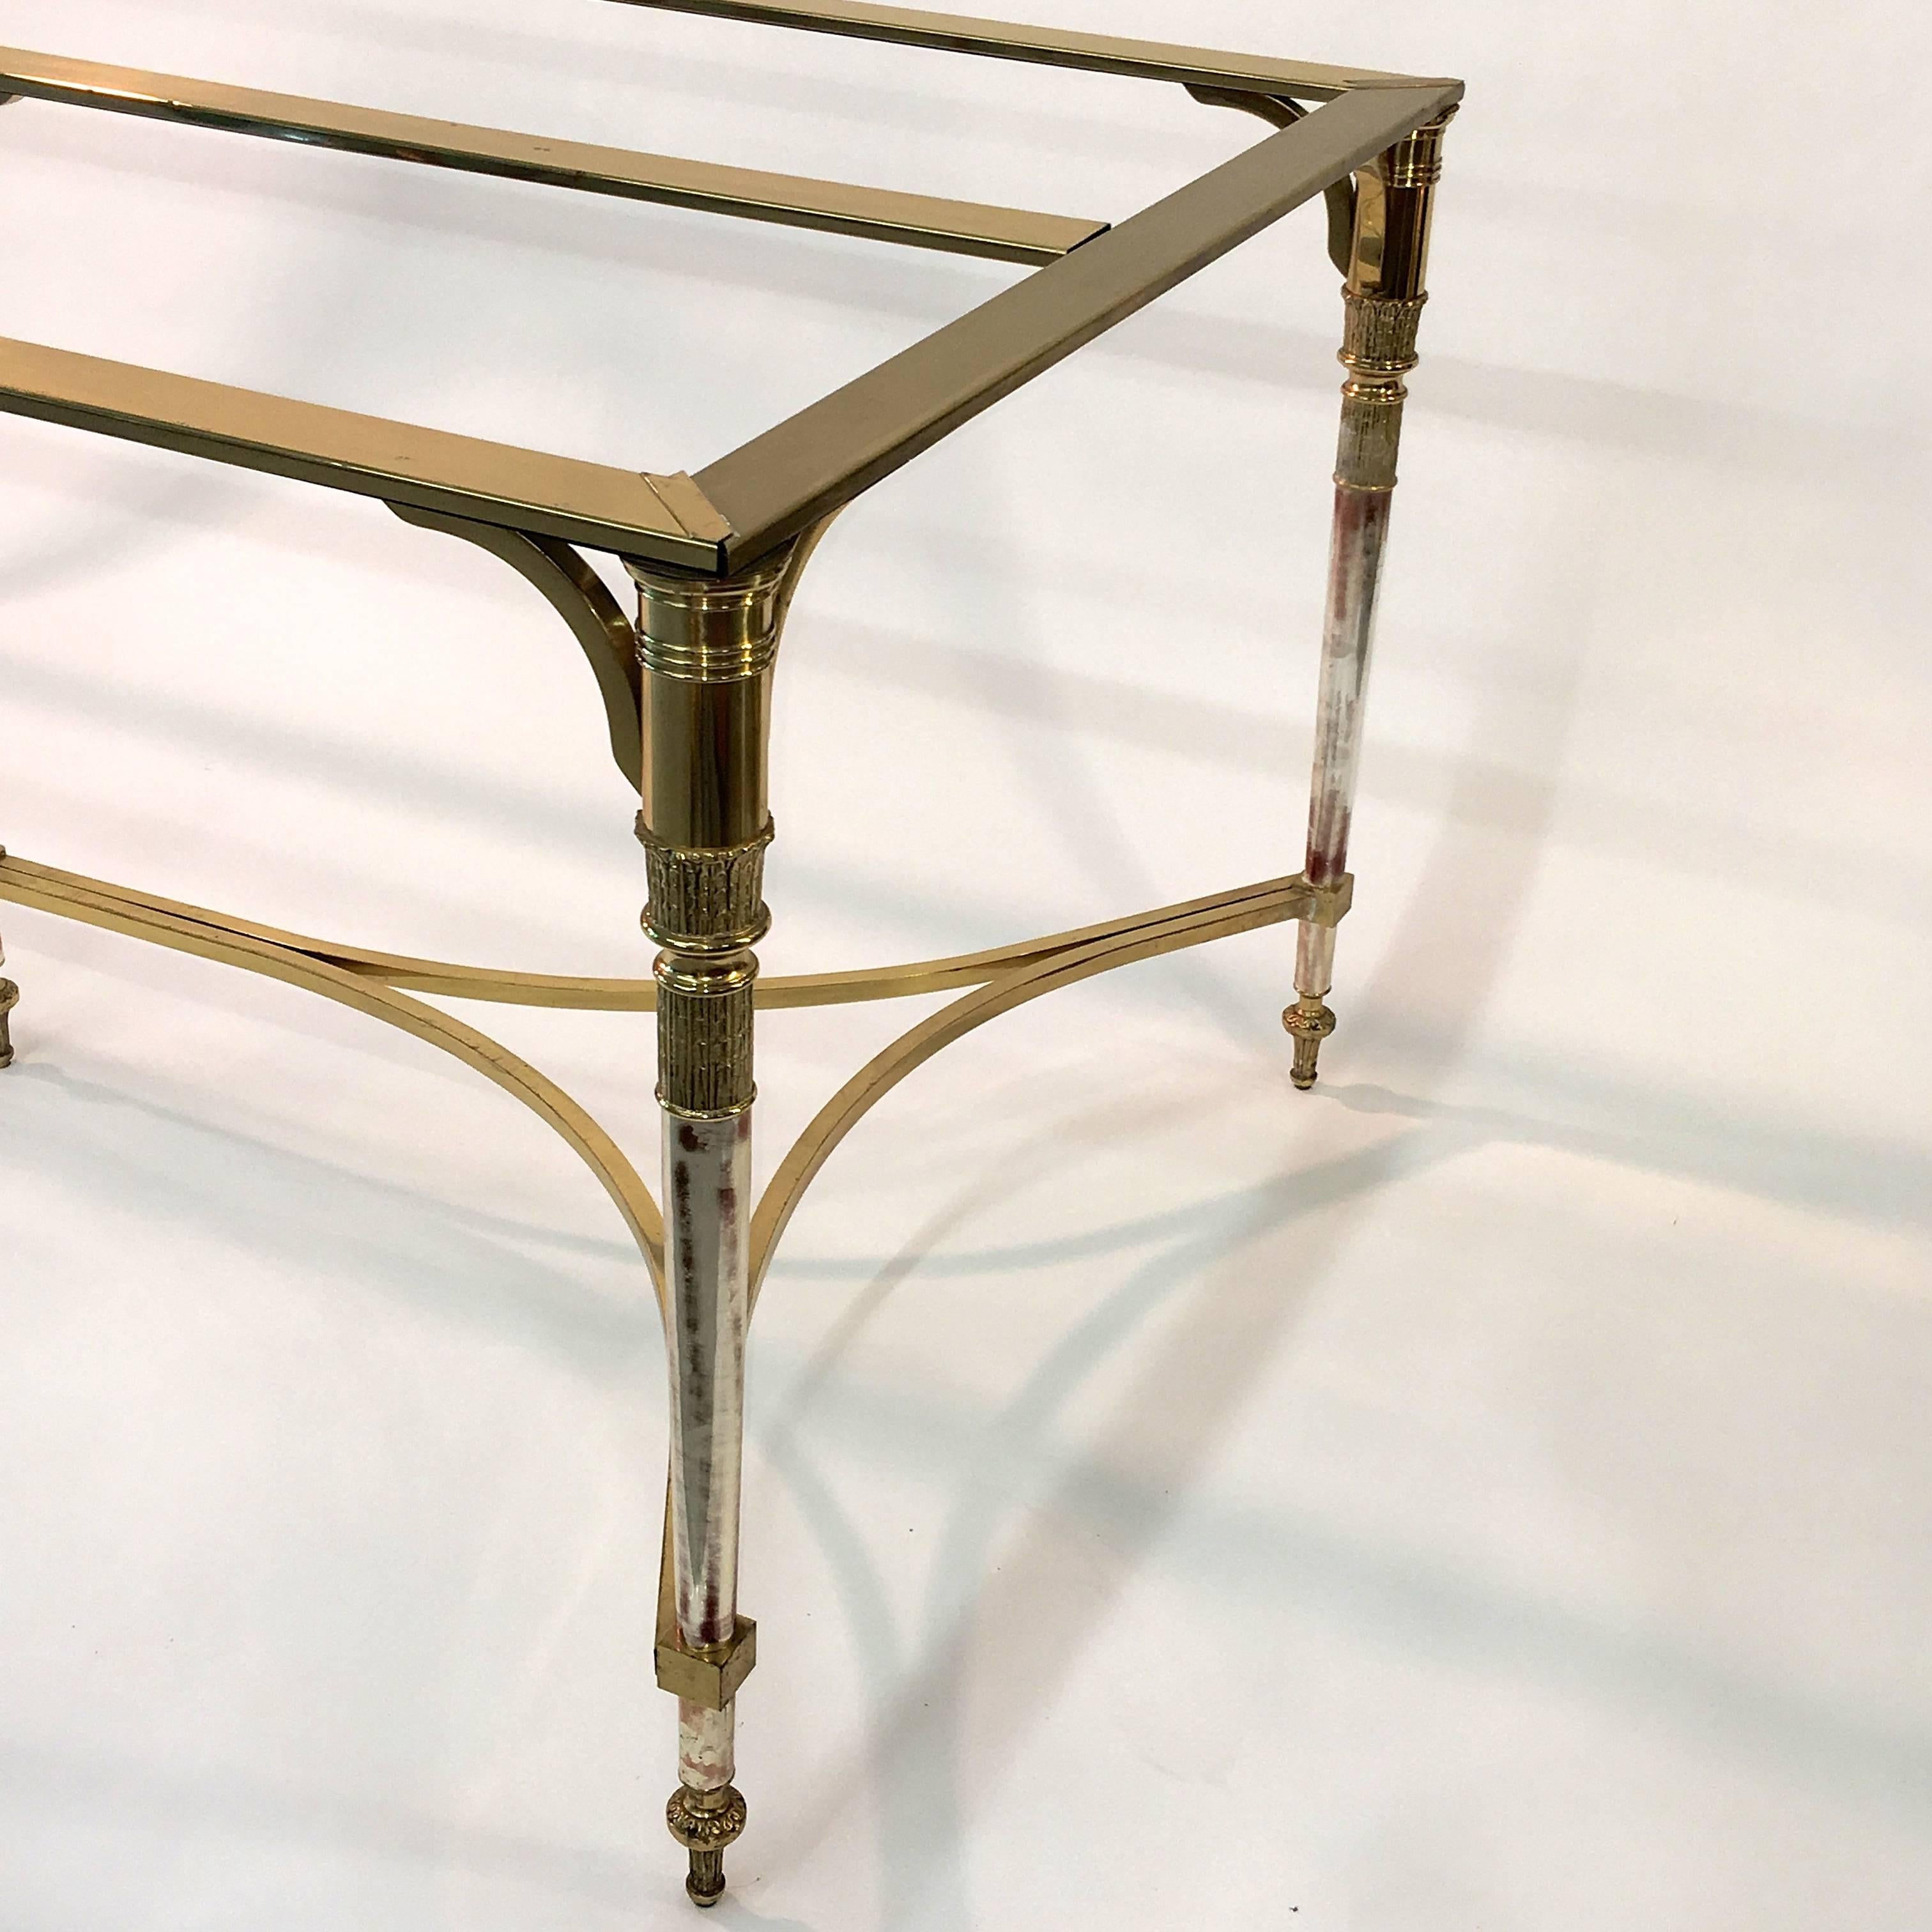 Hollywood Regency Maison Jansen Style Brass and Polished Steel Dining Table